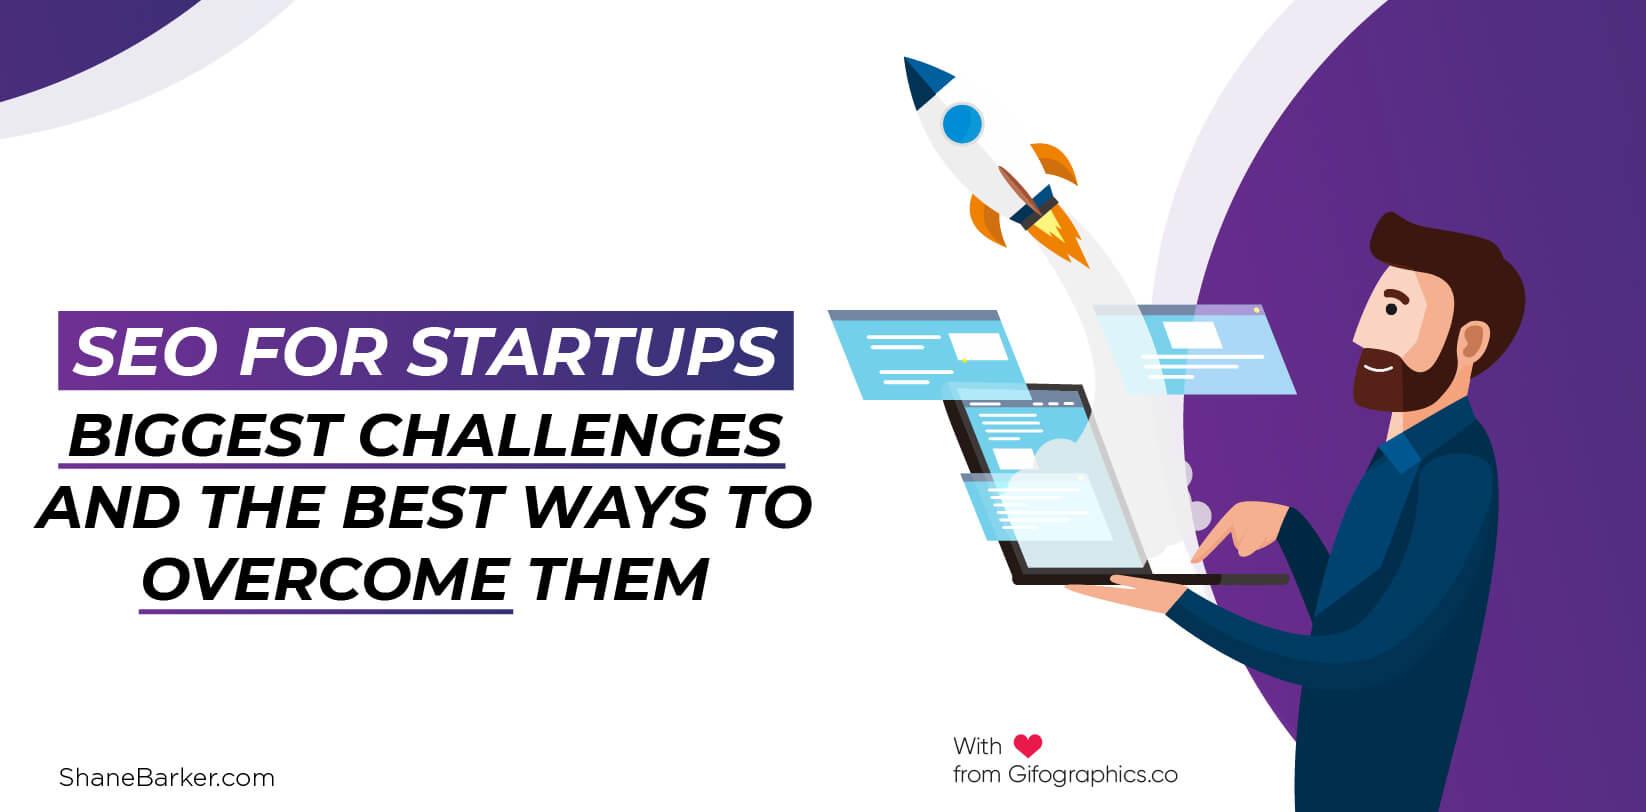 seo for startups: biggest challenges and the best ways to overcome them